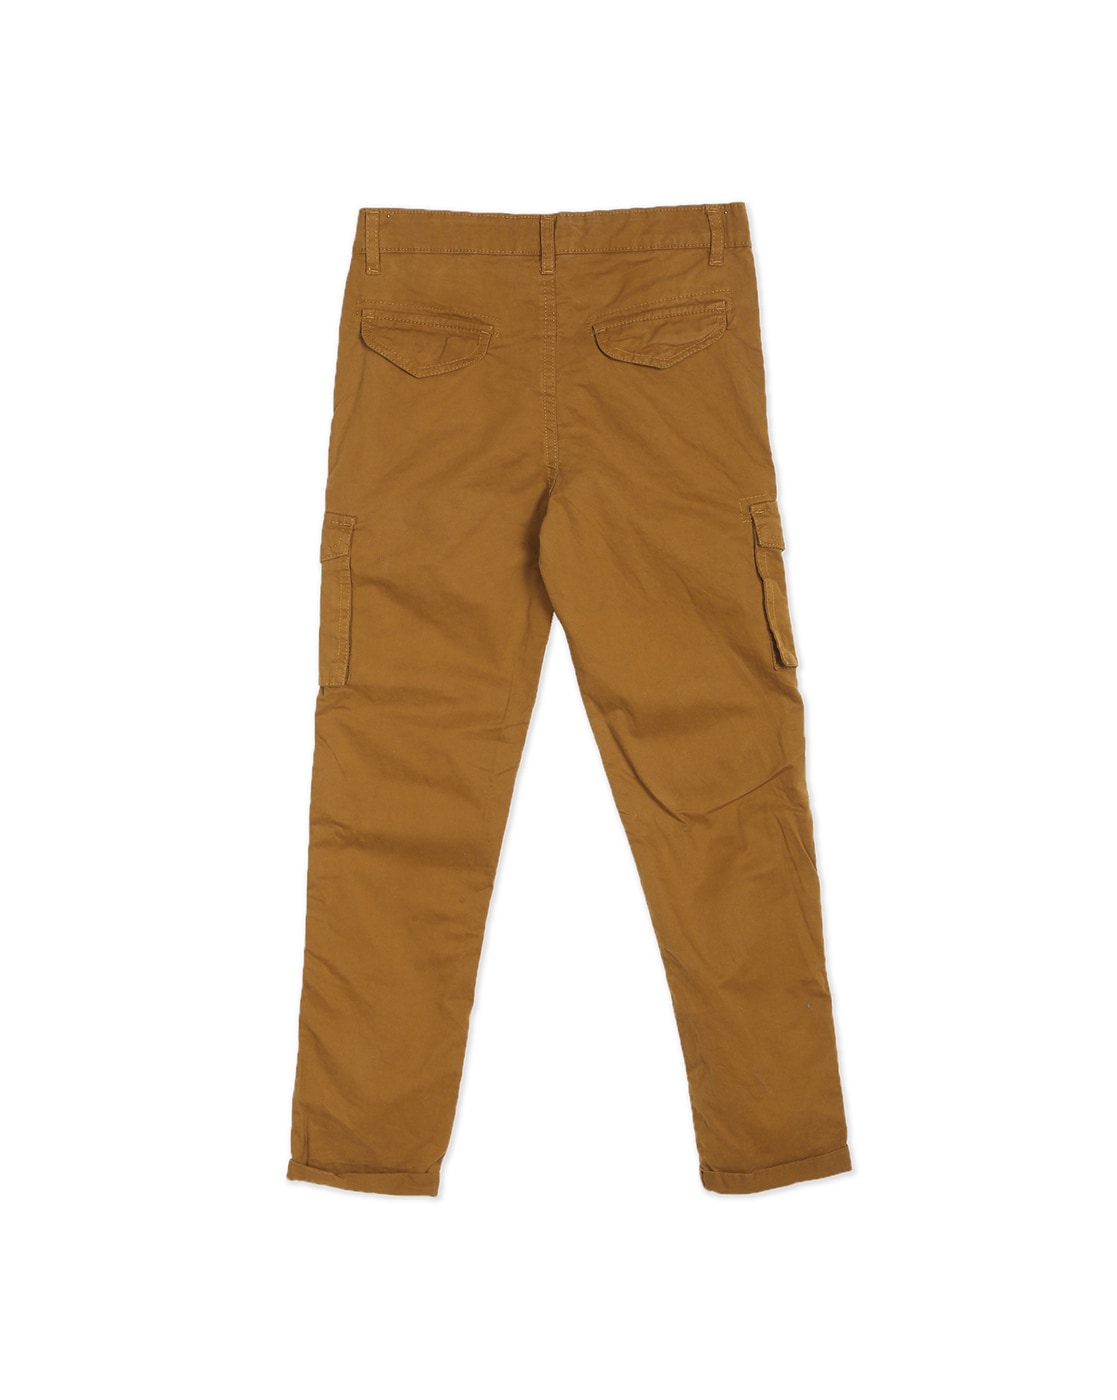 Cotton Brown Kid Boys Pant Age Group 68 Years Size 16